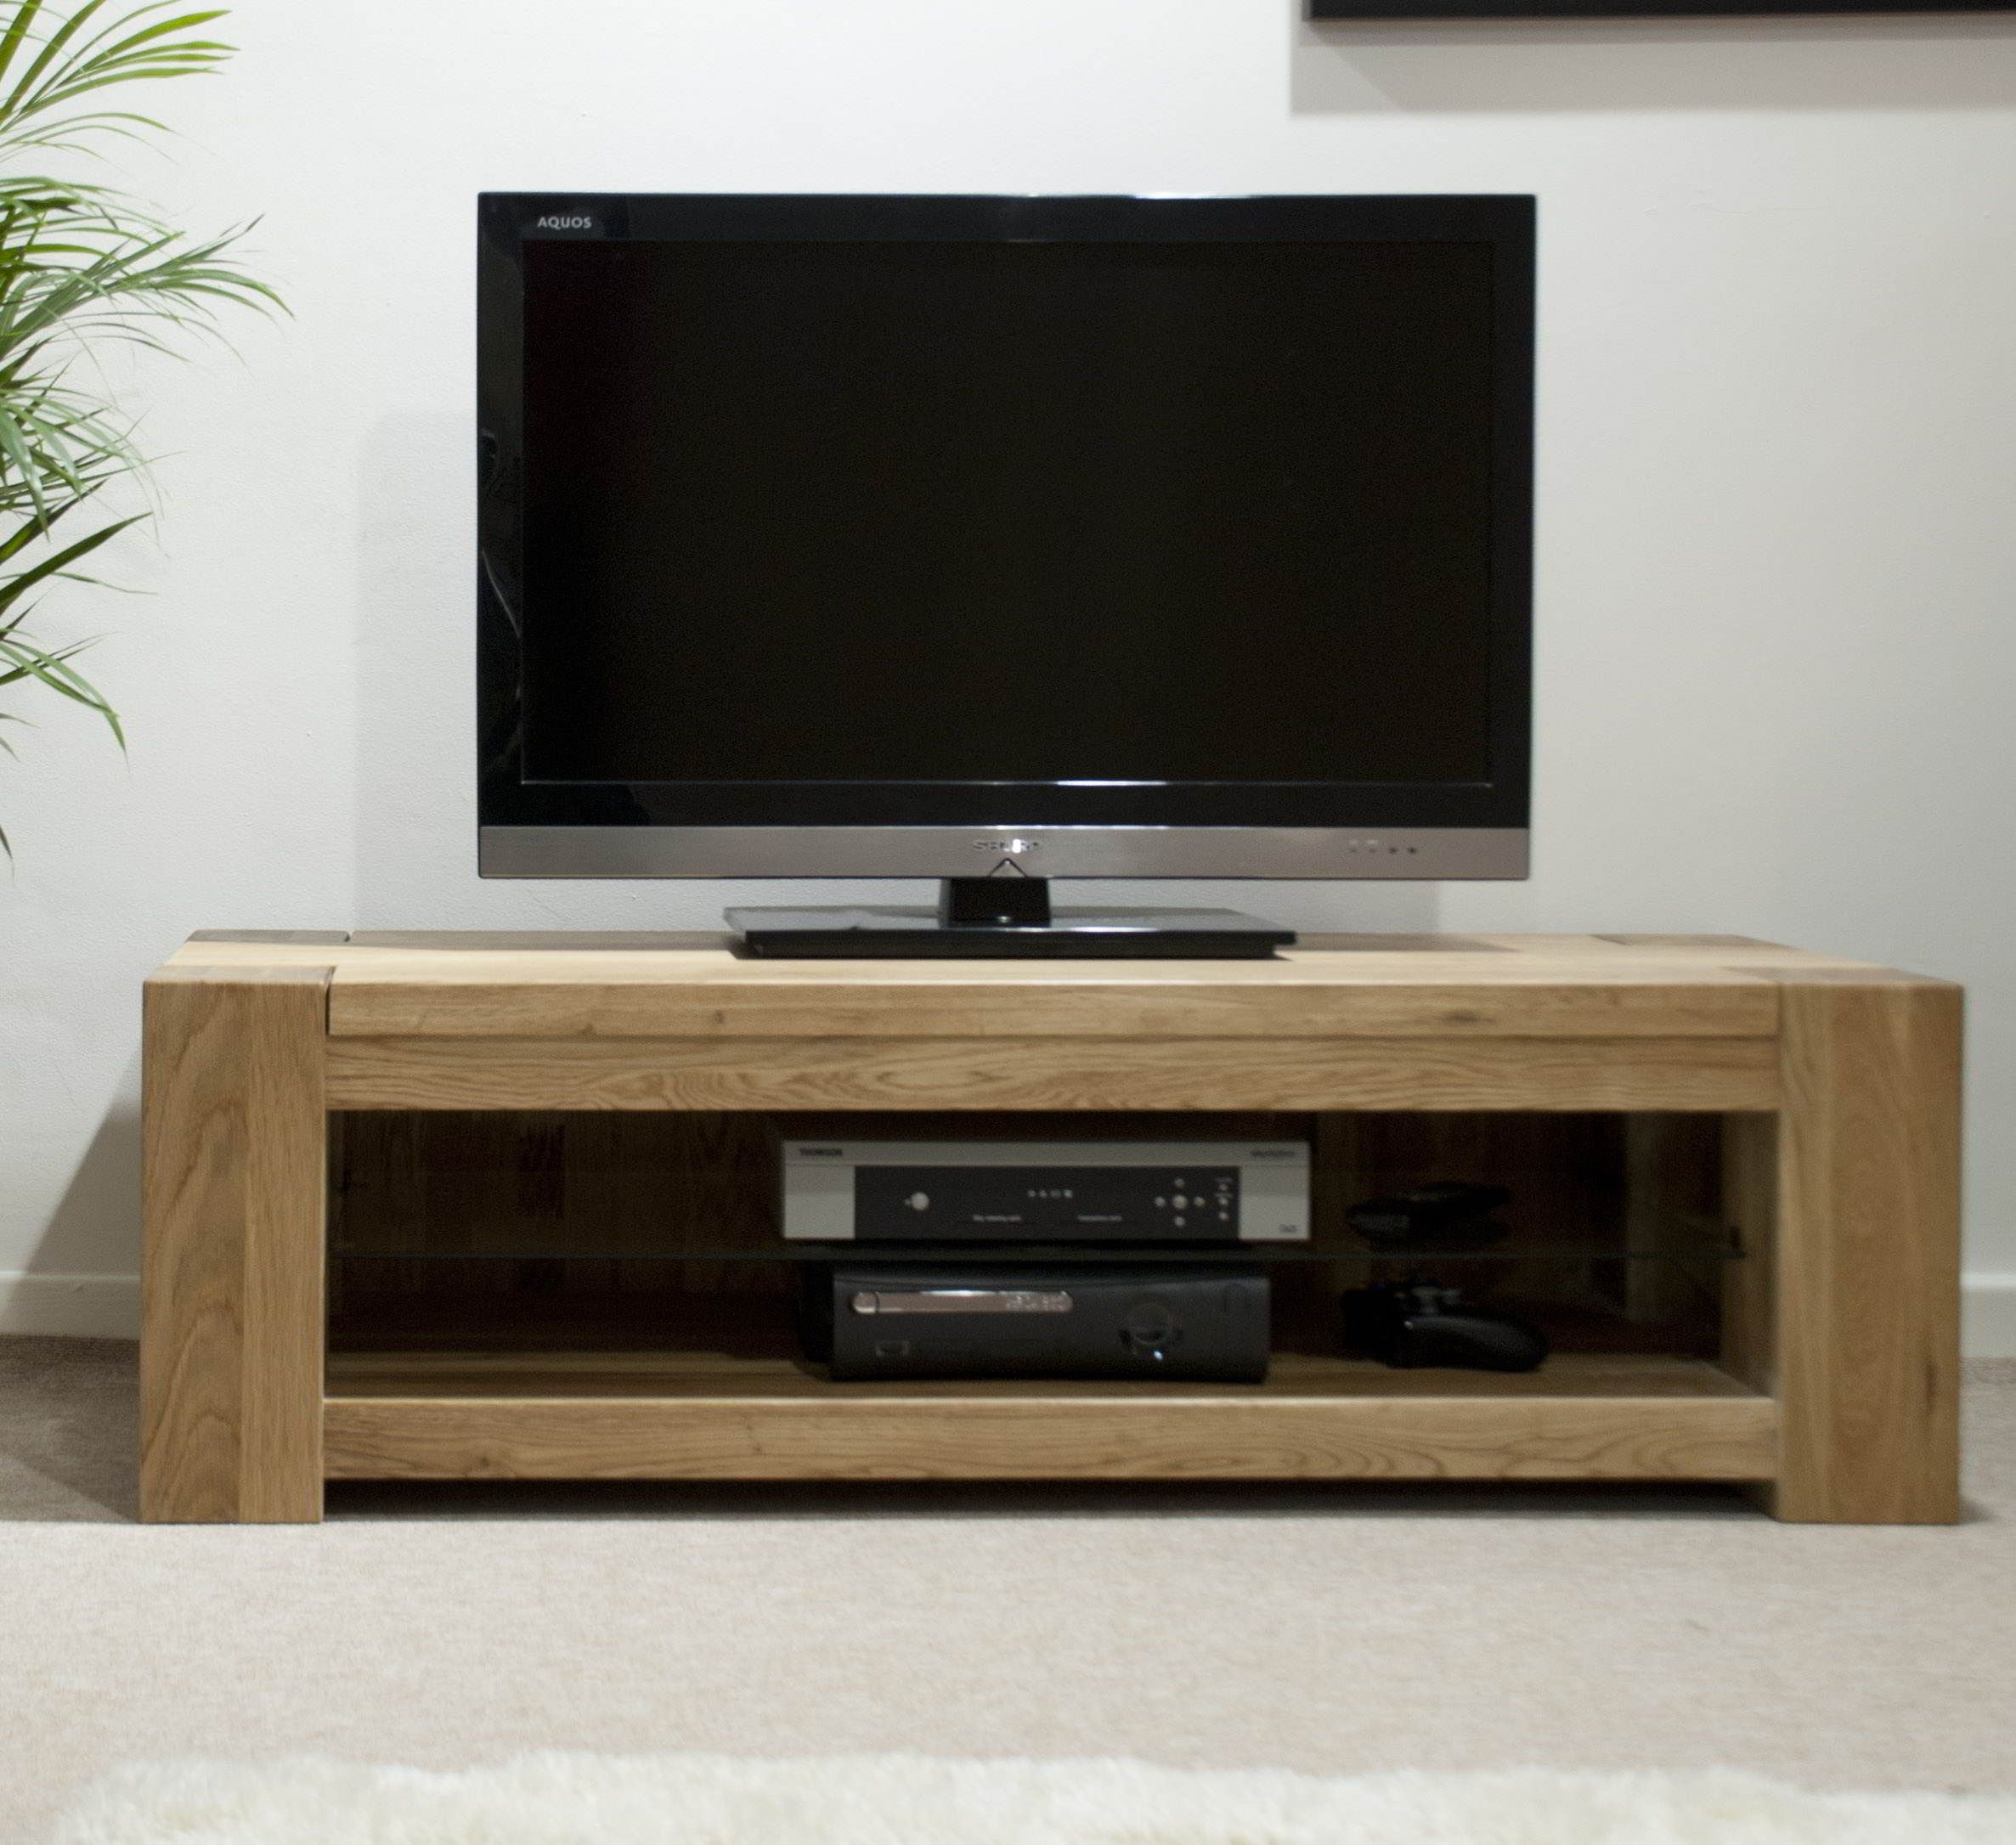 Padova Solid Oak Furniture Plasma Television Cabinet Stand Throughout Long Low Tv Cabinets (Photo 5 of 15)